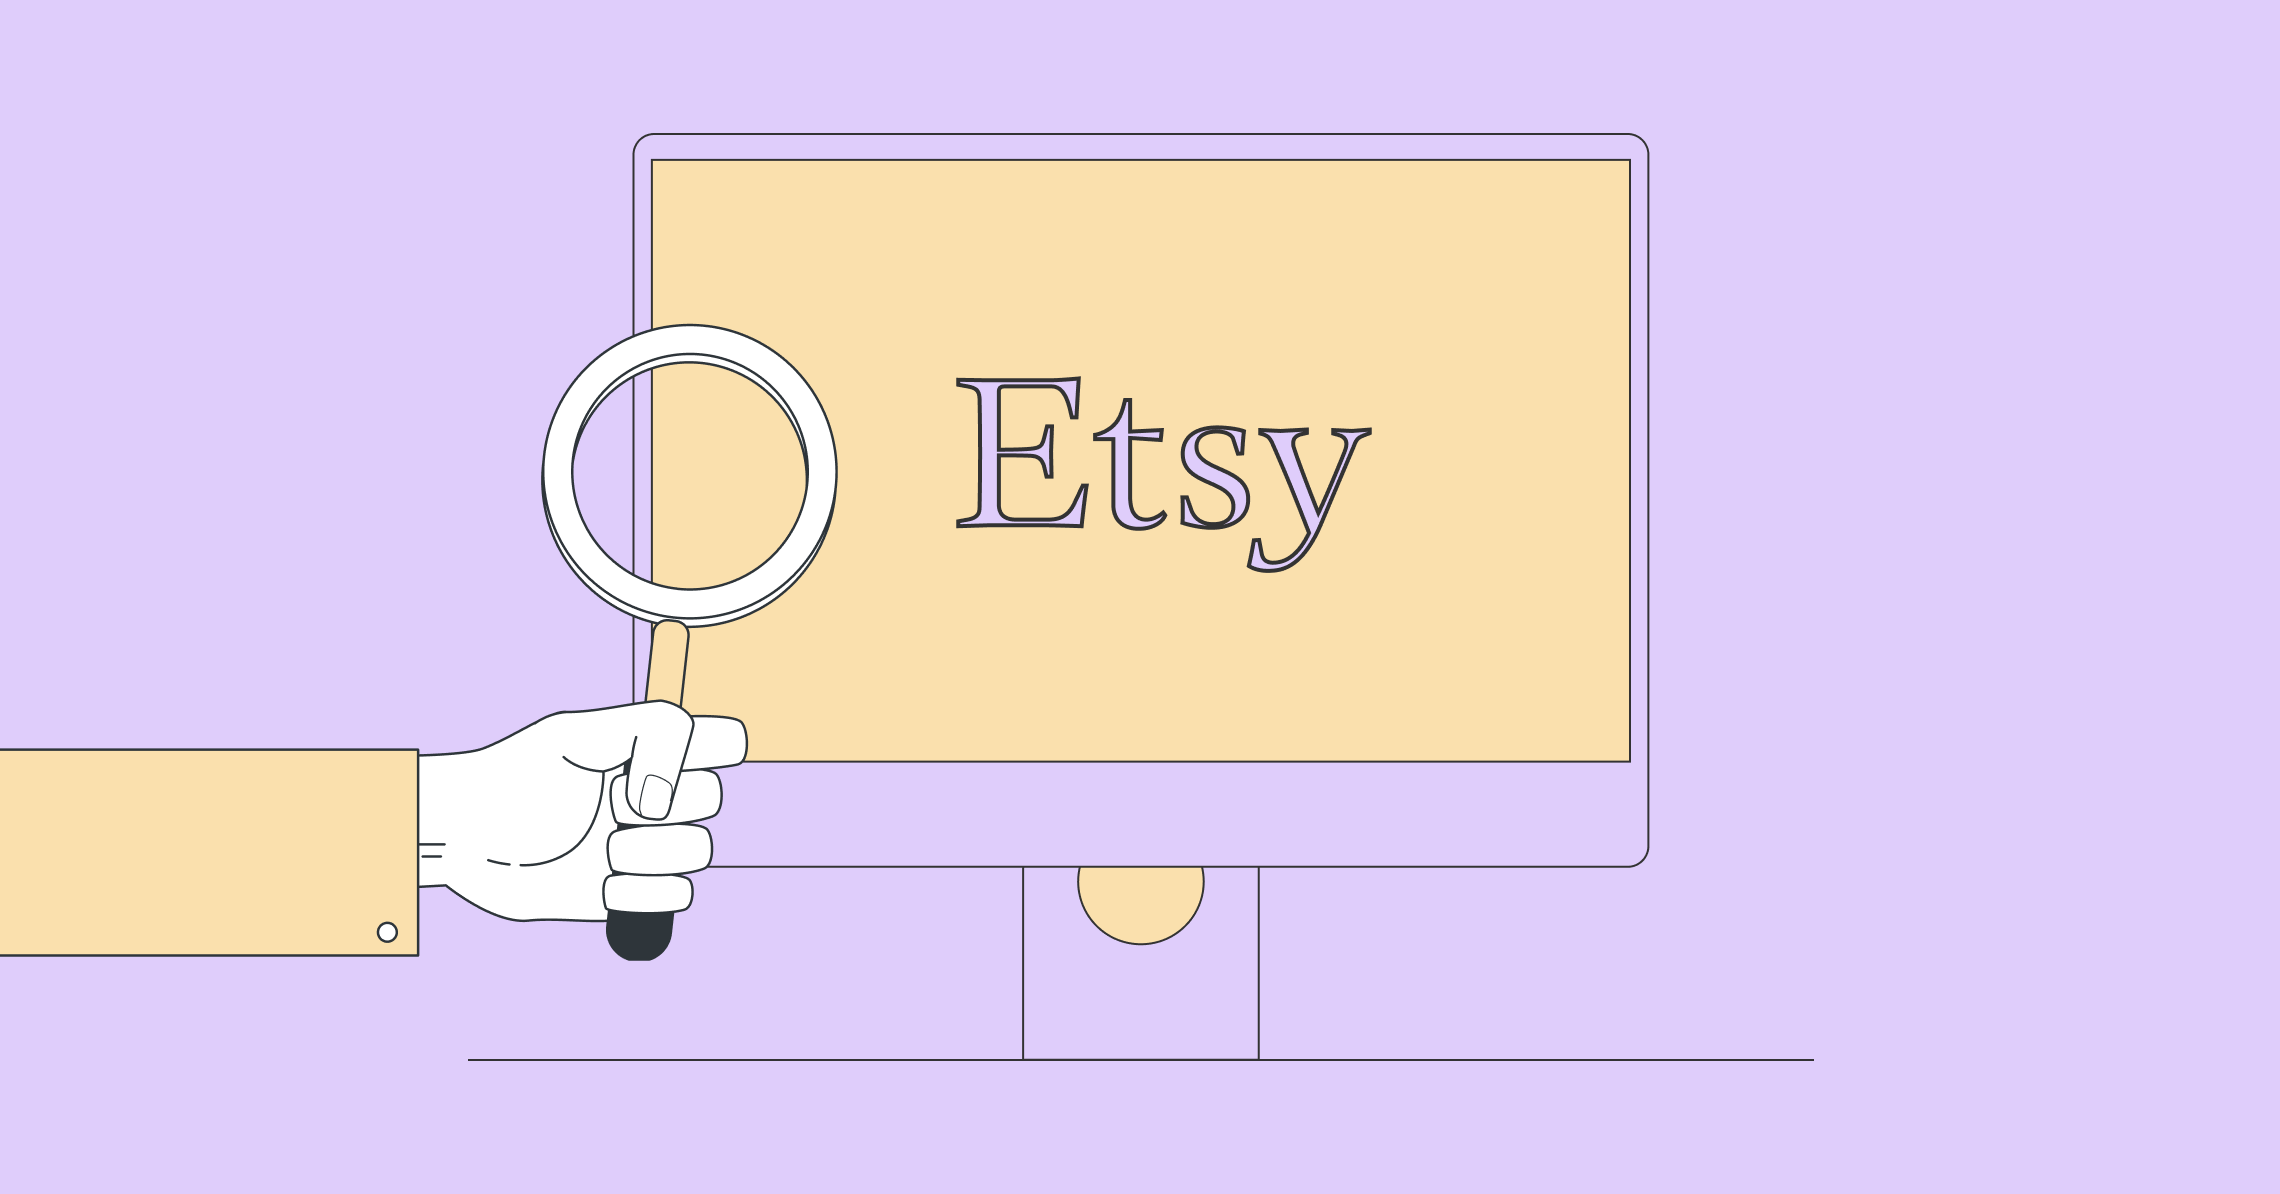 10 Useful Etsy SEO Tips to Improve Your Rankings